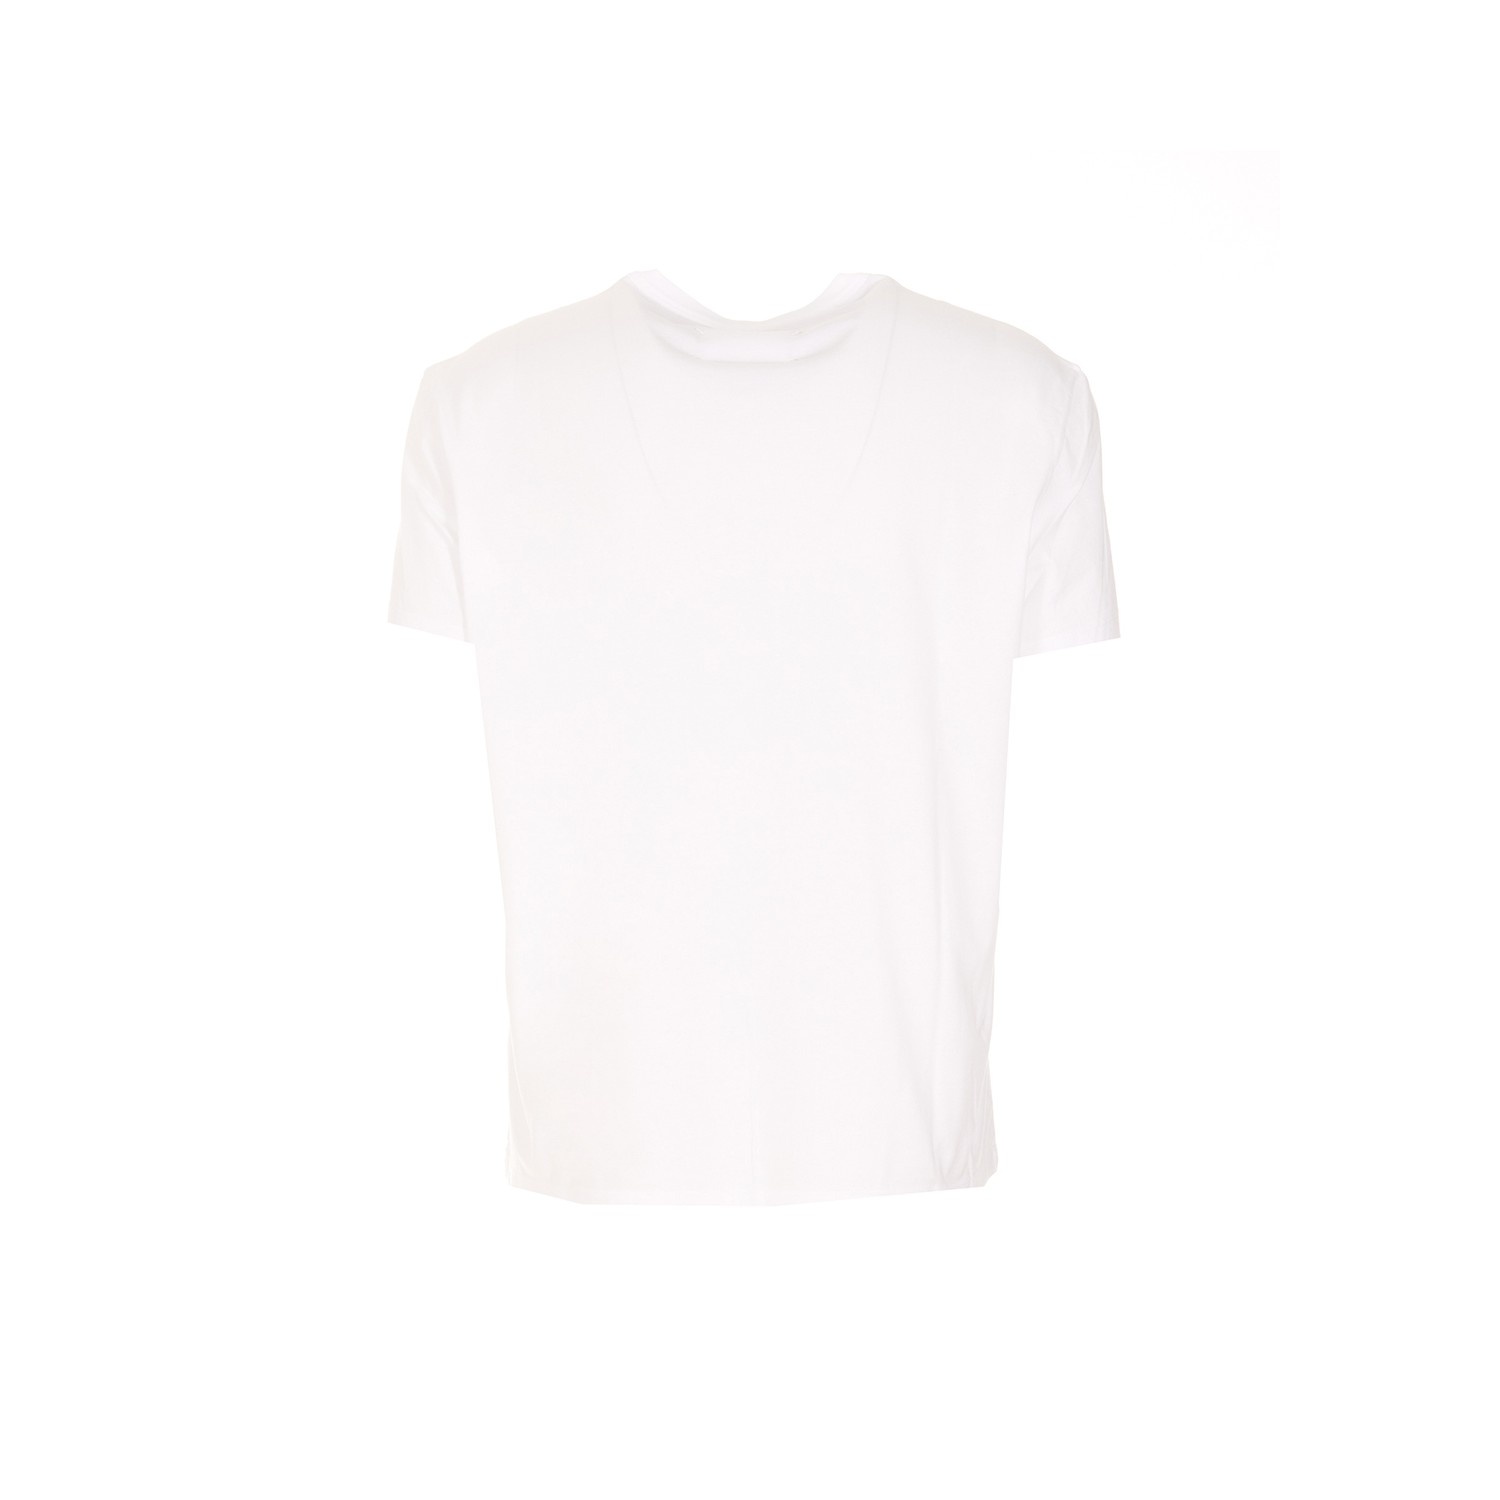 WHITE AND BLACK COTTON T-SHIRT - 2